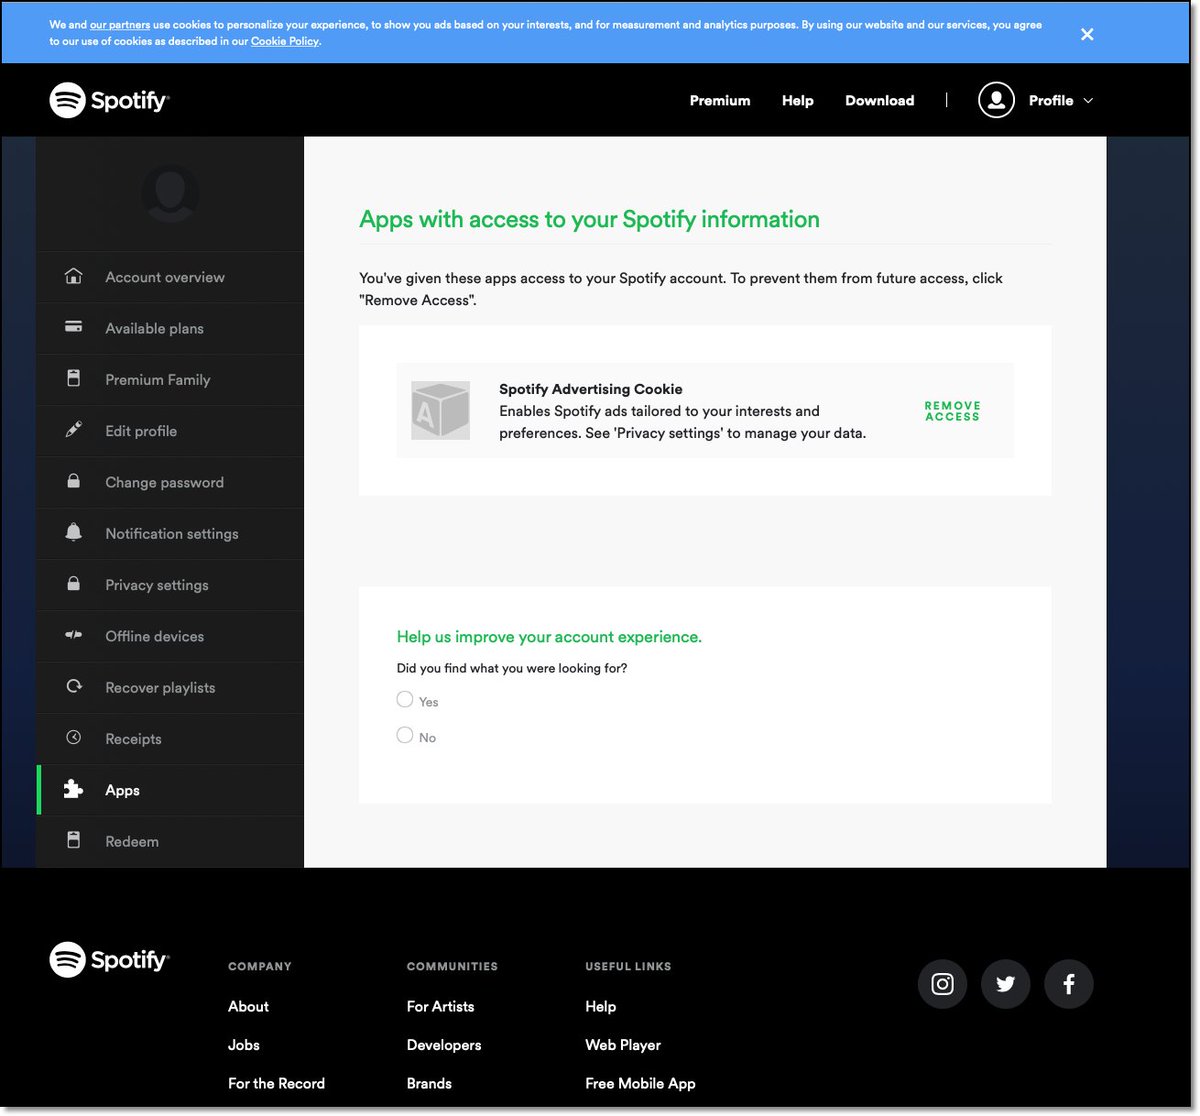 That's not all. From within the desktop app profile click 'account' that will open a web browser. Or simply log-into your account via a browser. On the left, click the 'apps' option - a Spotify Advertising Cookie is automatically set to 'enable Spotify [tailored] ads'. Consent?